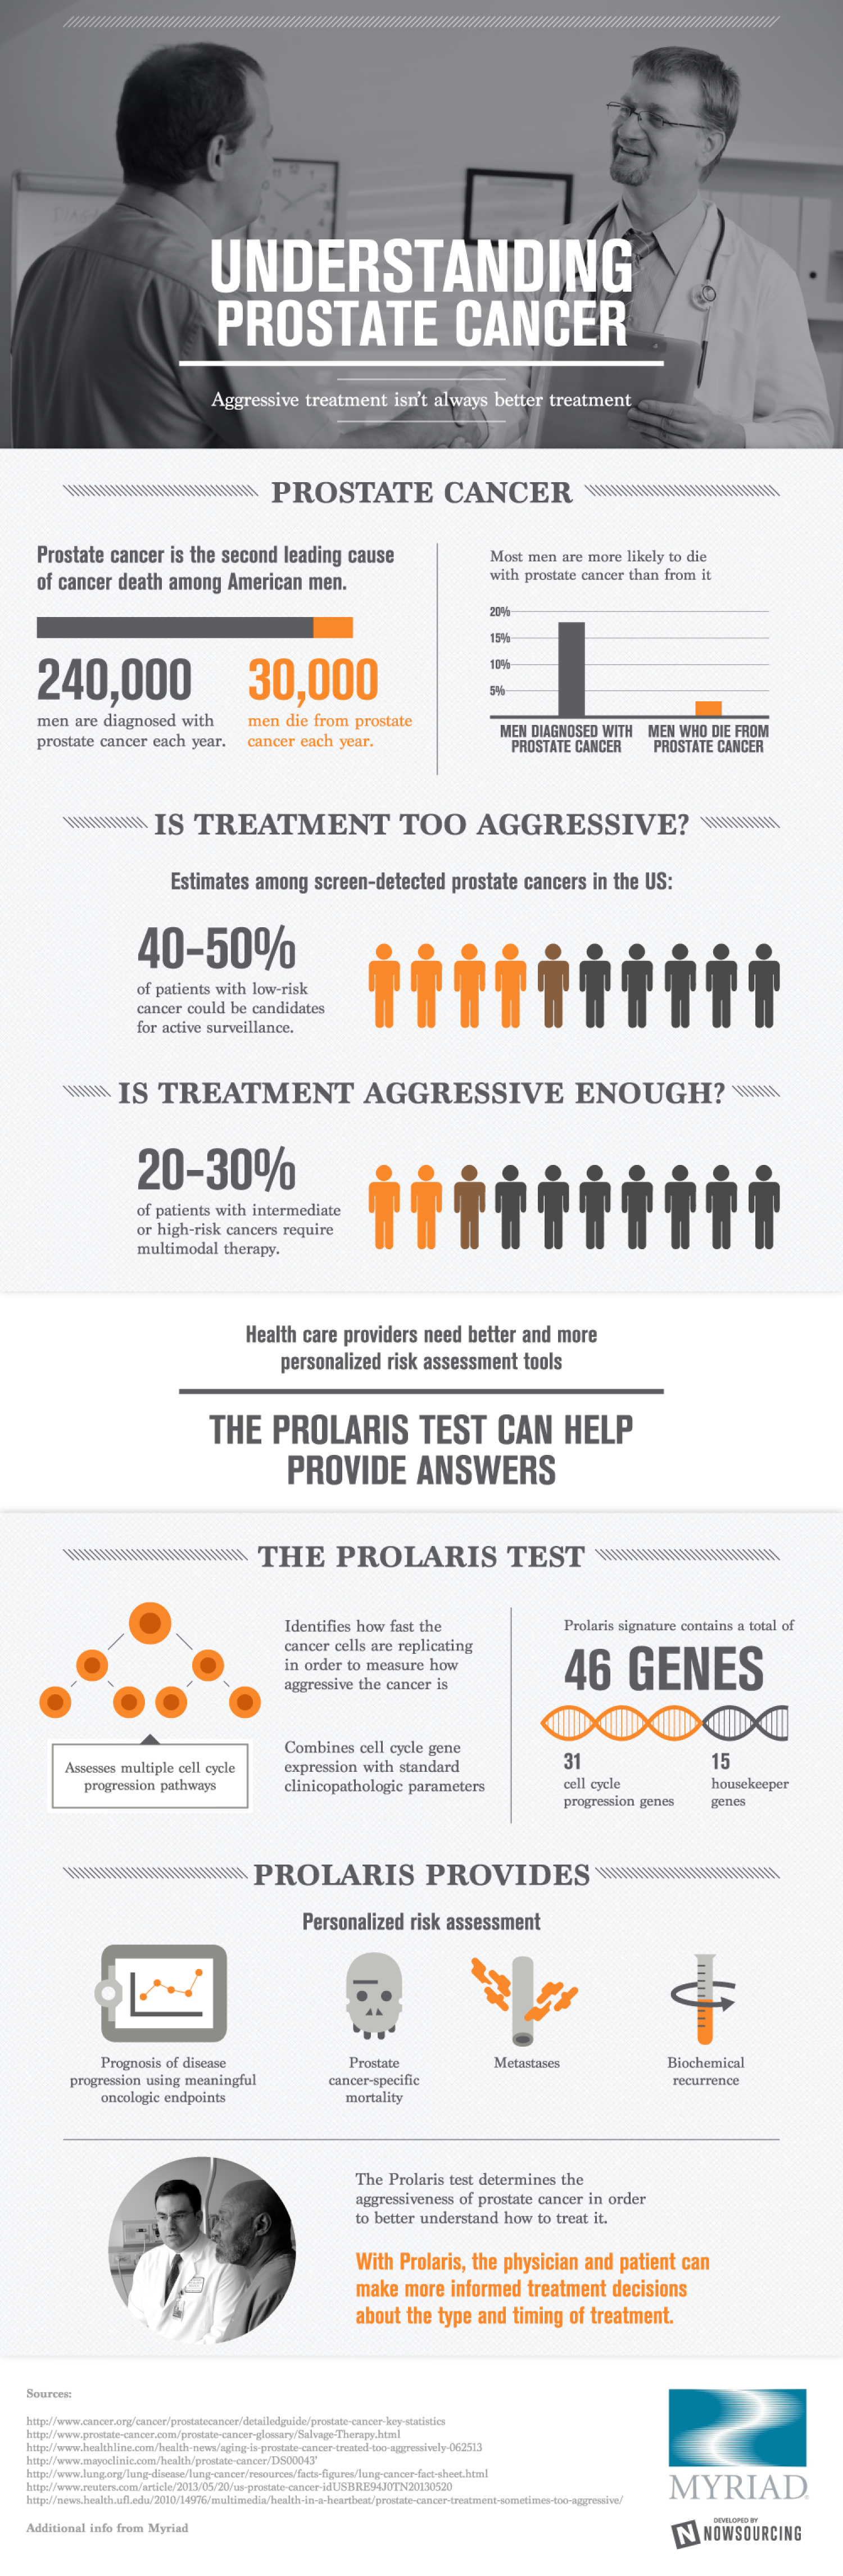 30,000 Men Die Every Year From Prostate Cancer Infographic